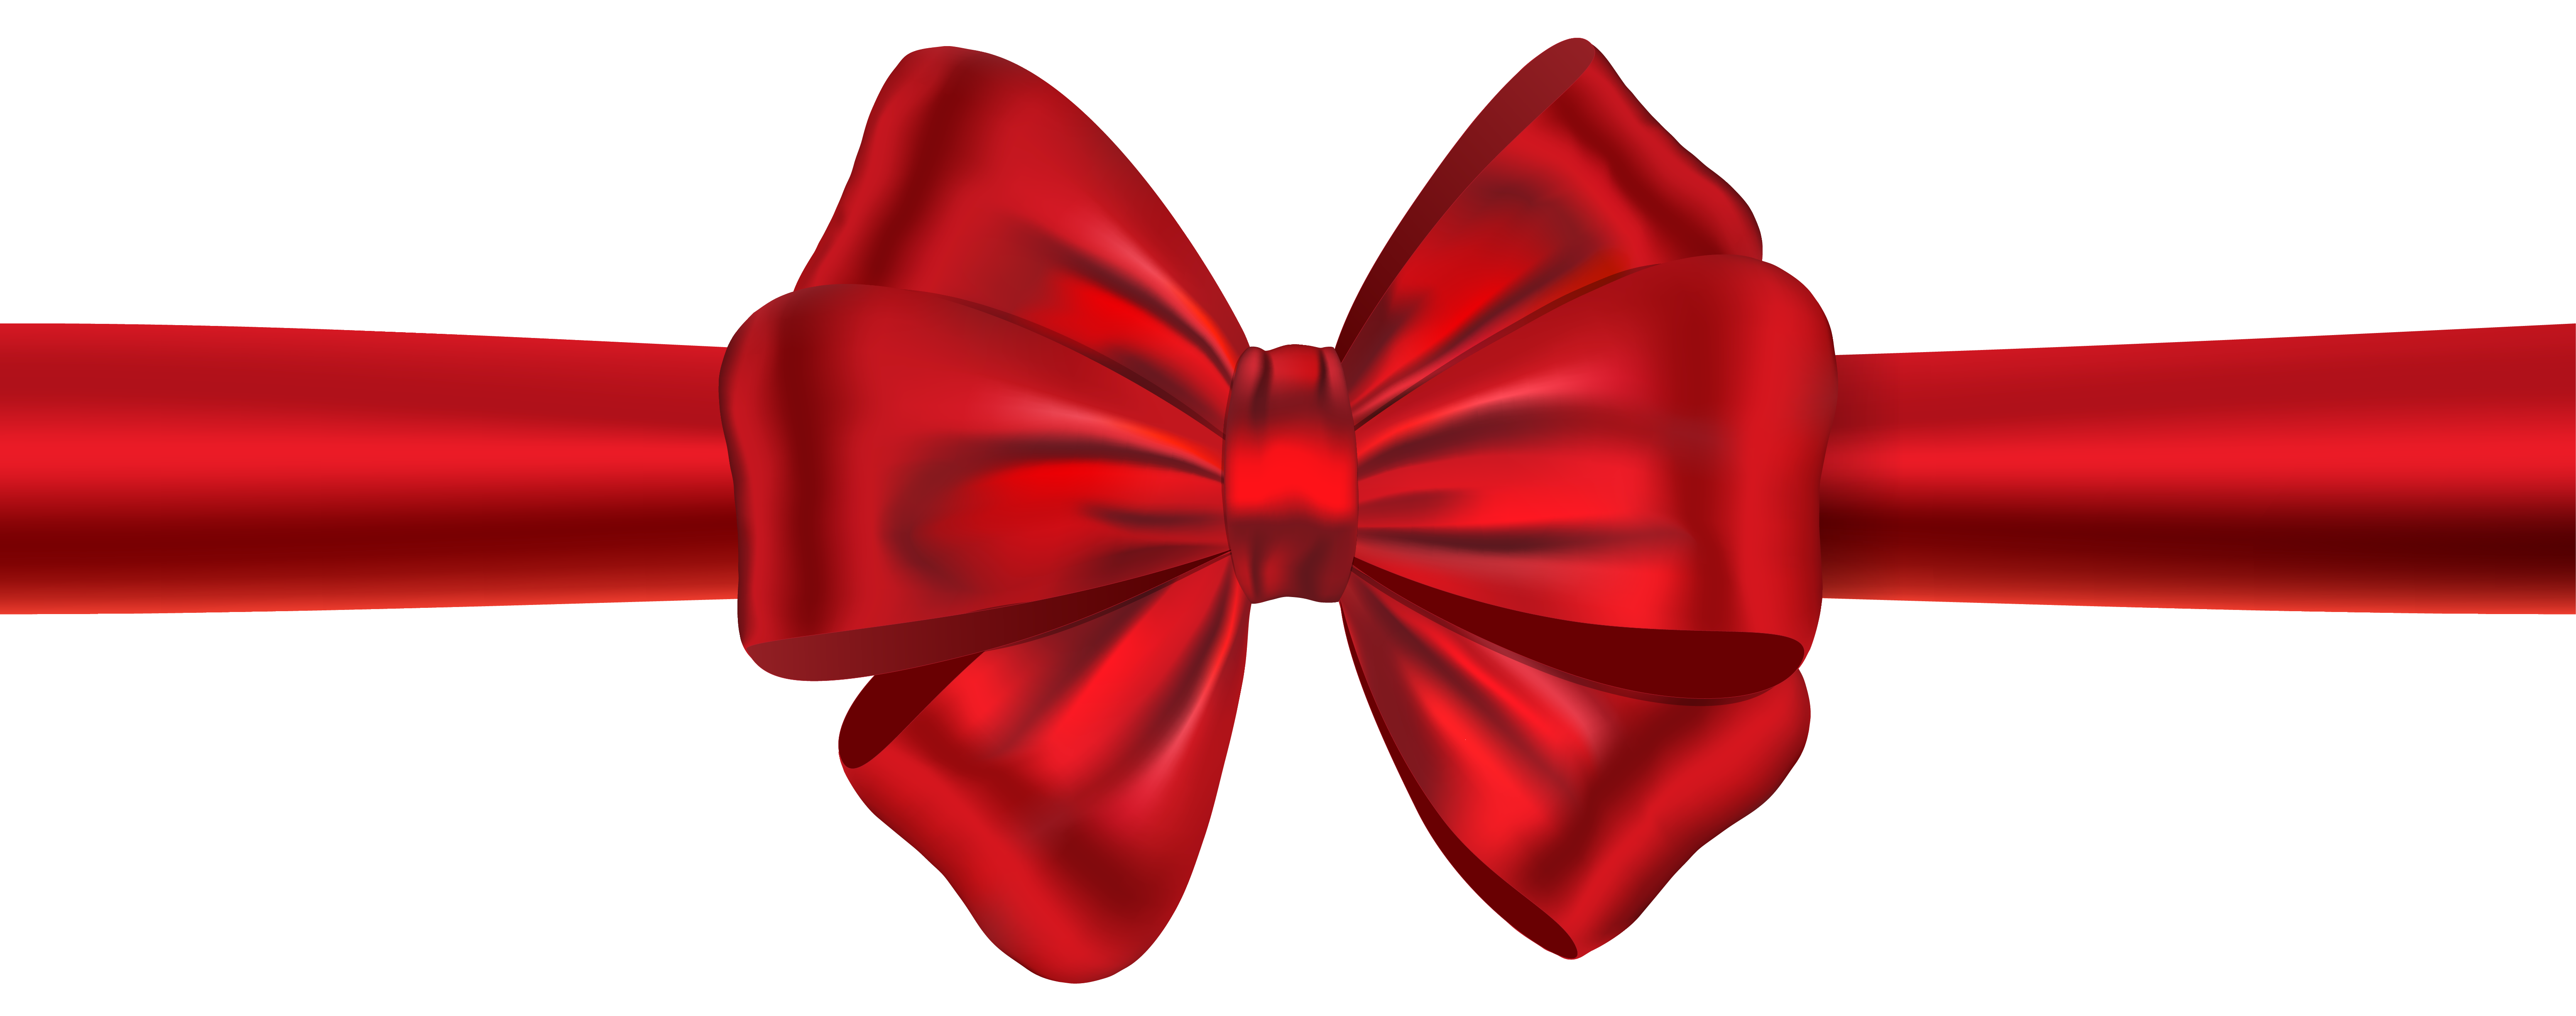 Red bow clipart transparent